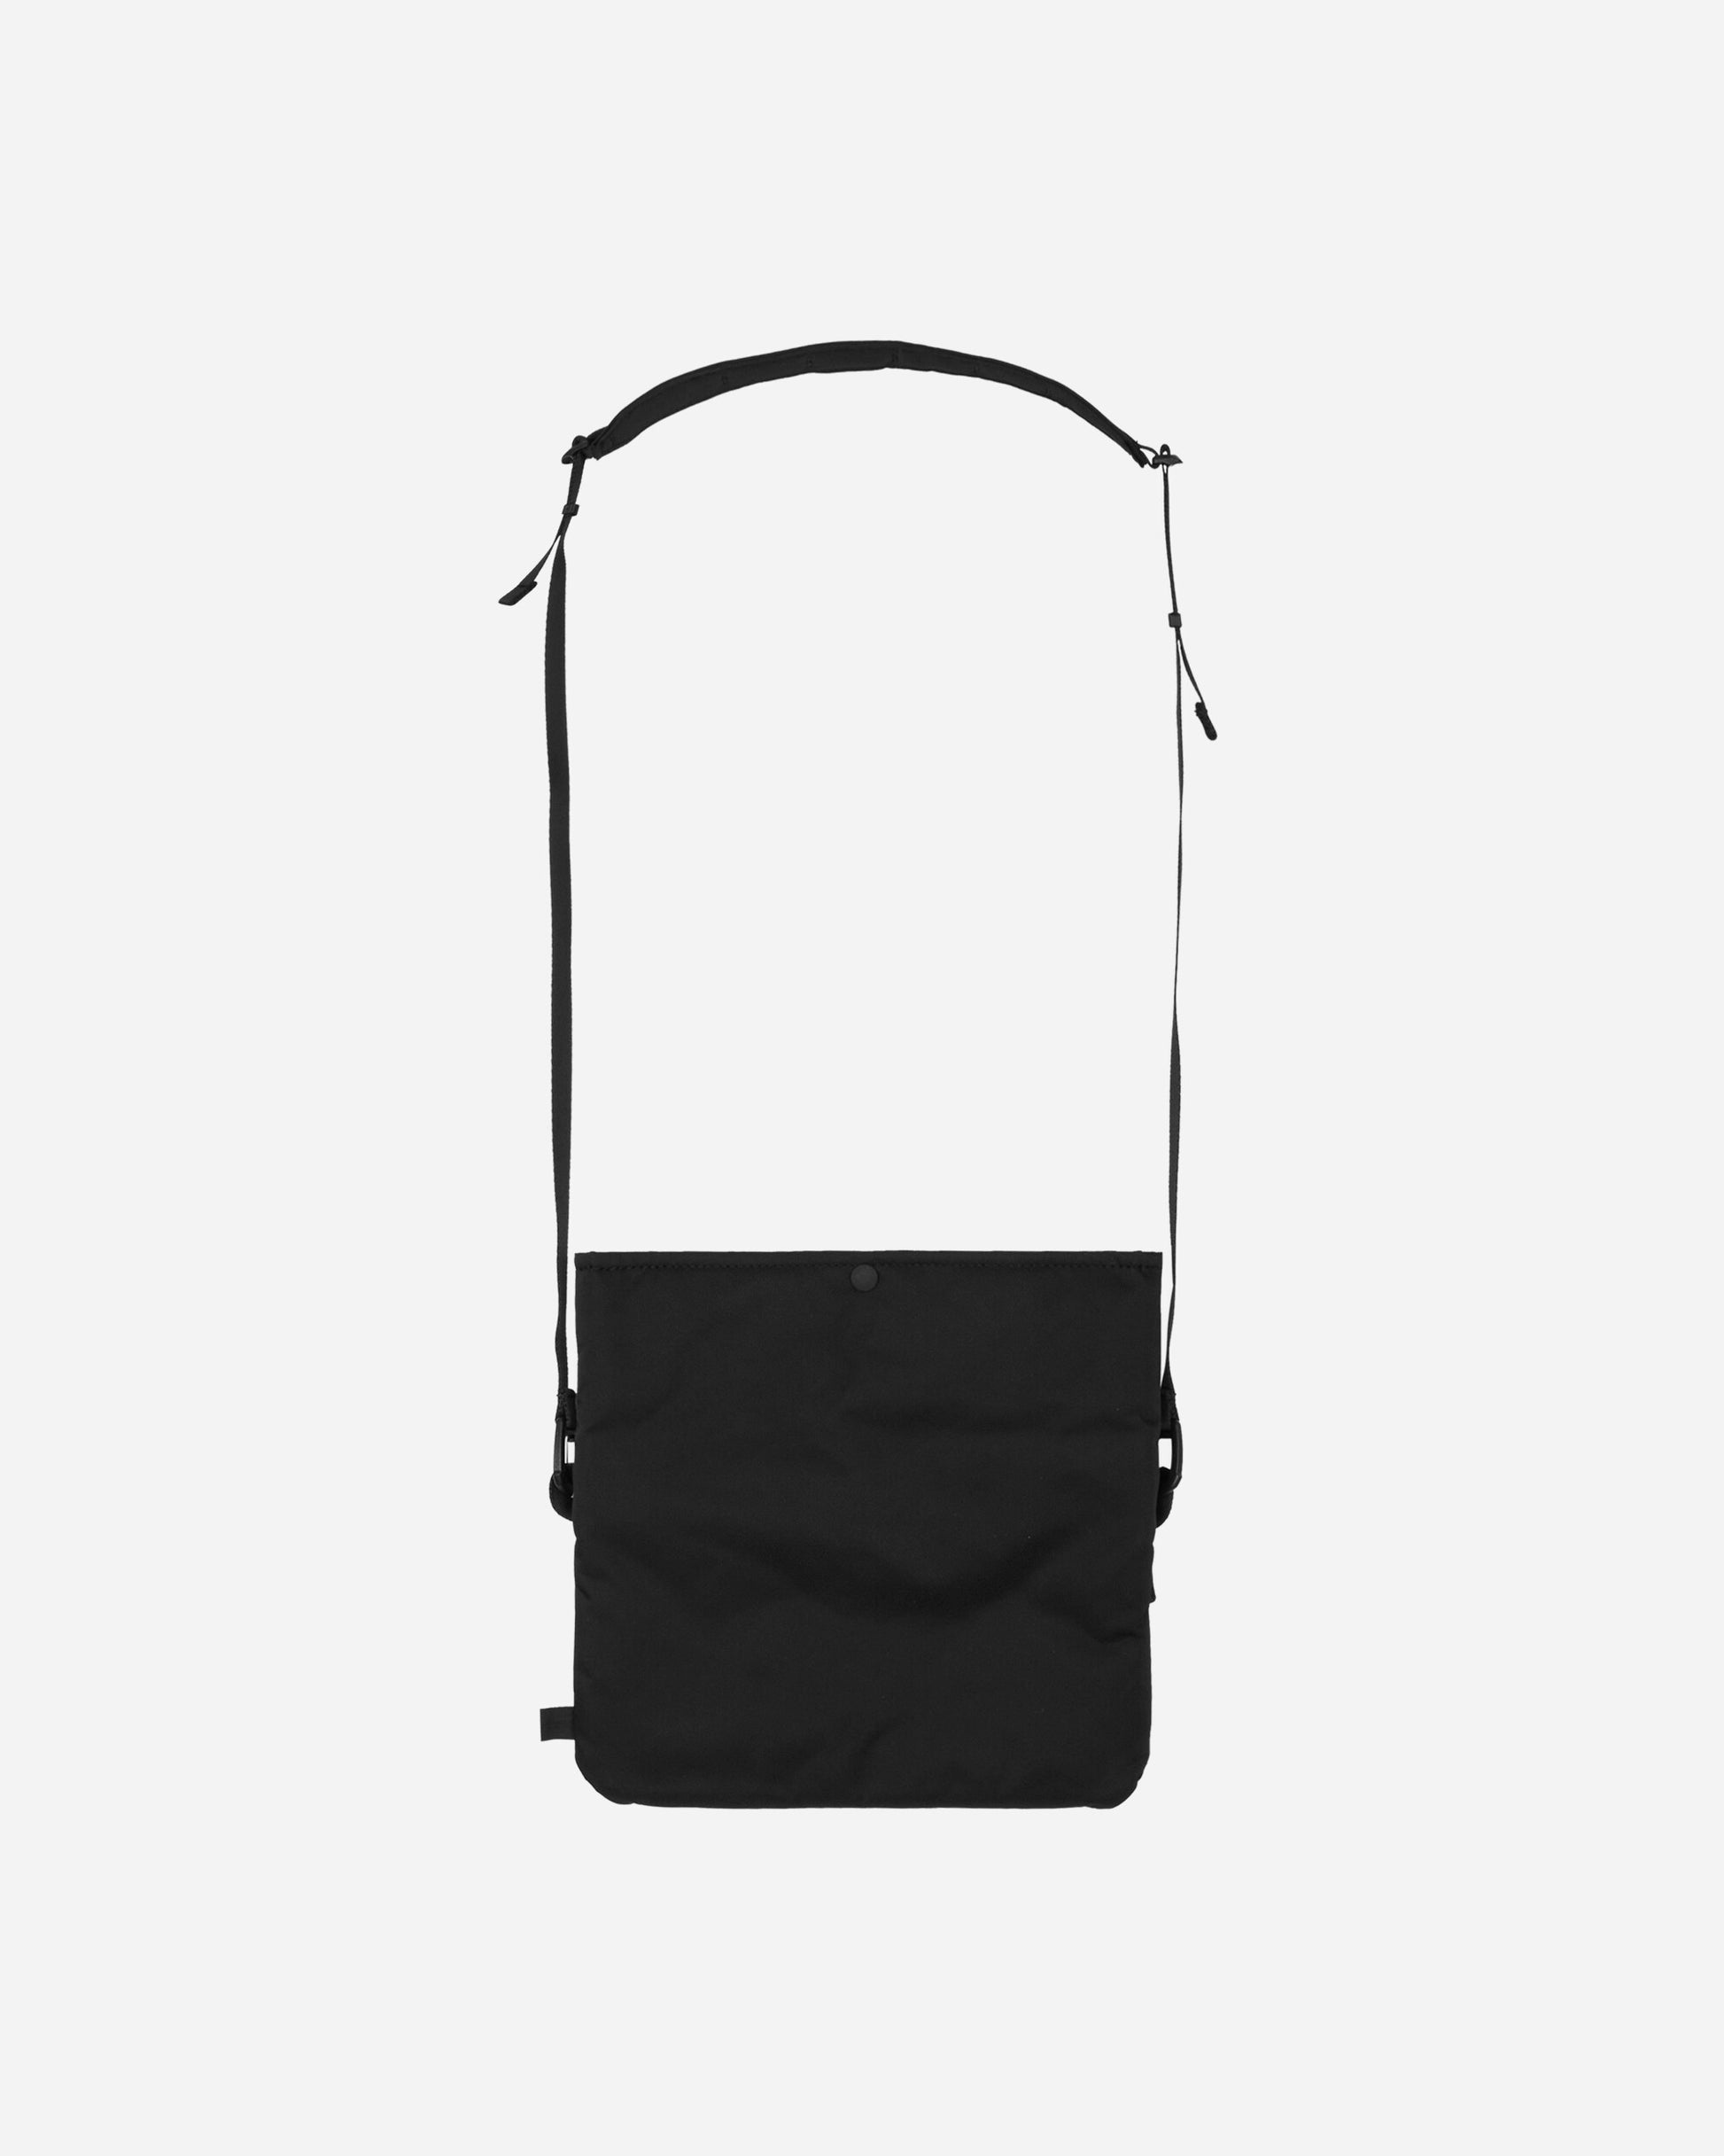 Ramidus Sacoche Black Bags and Backpacks Pouches B017031 001